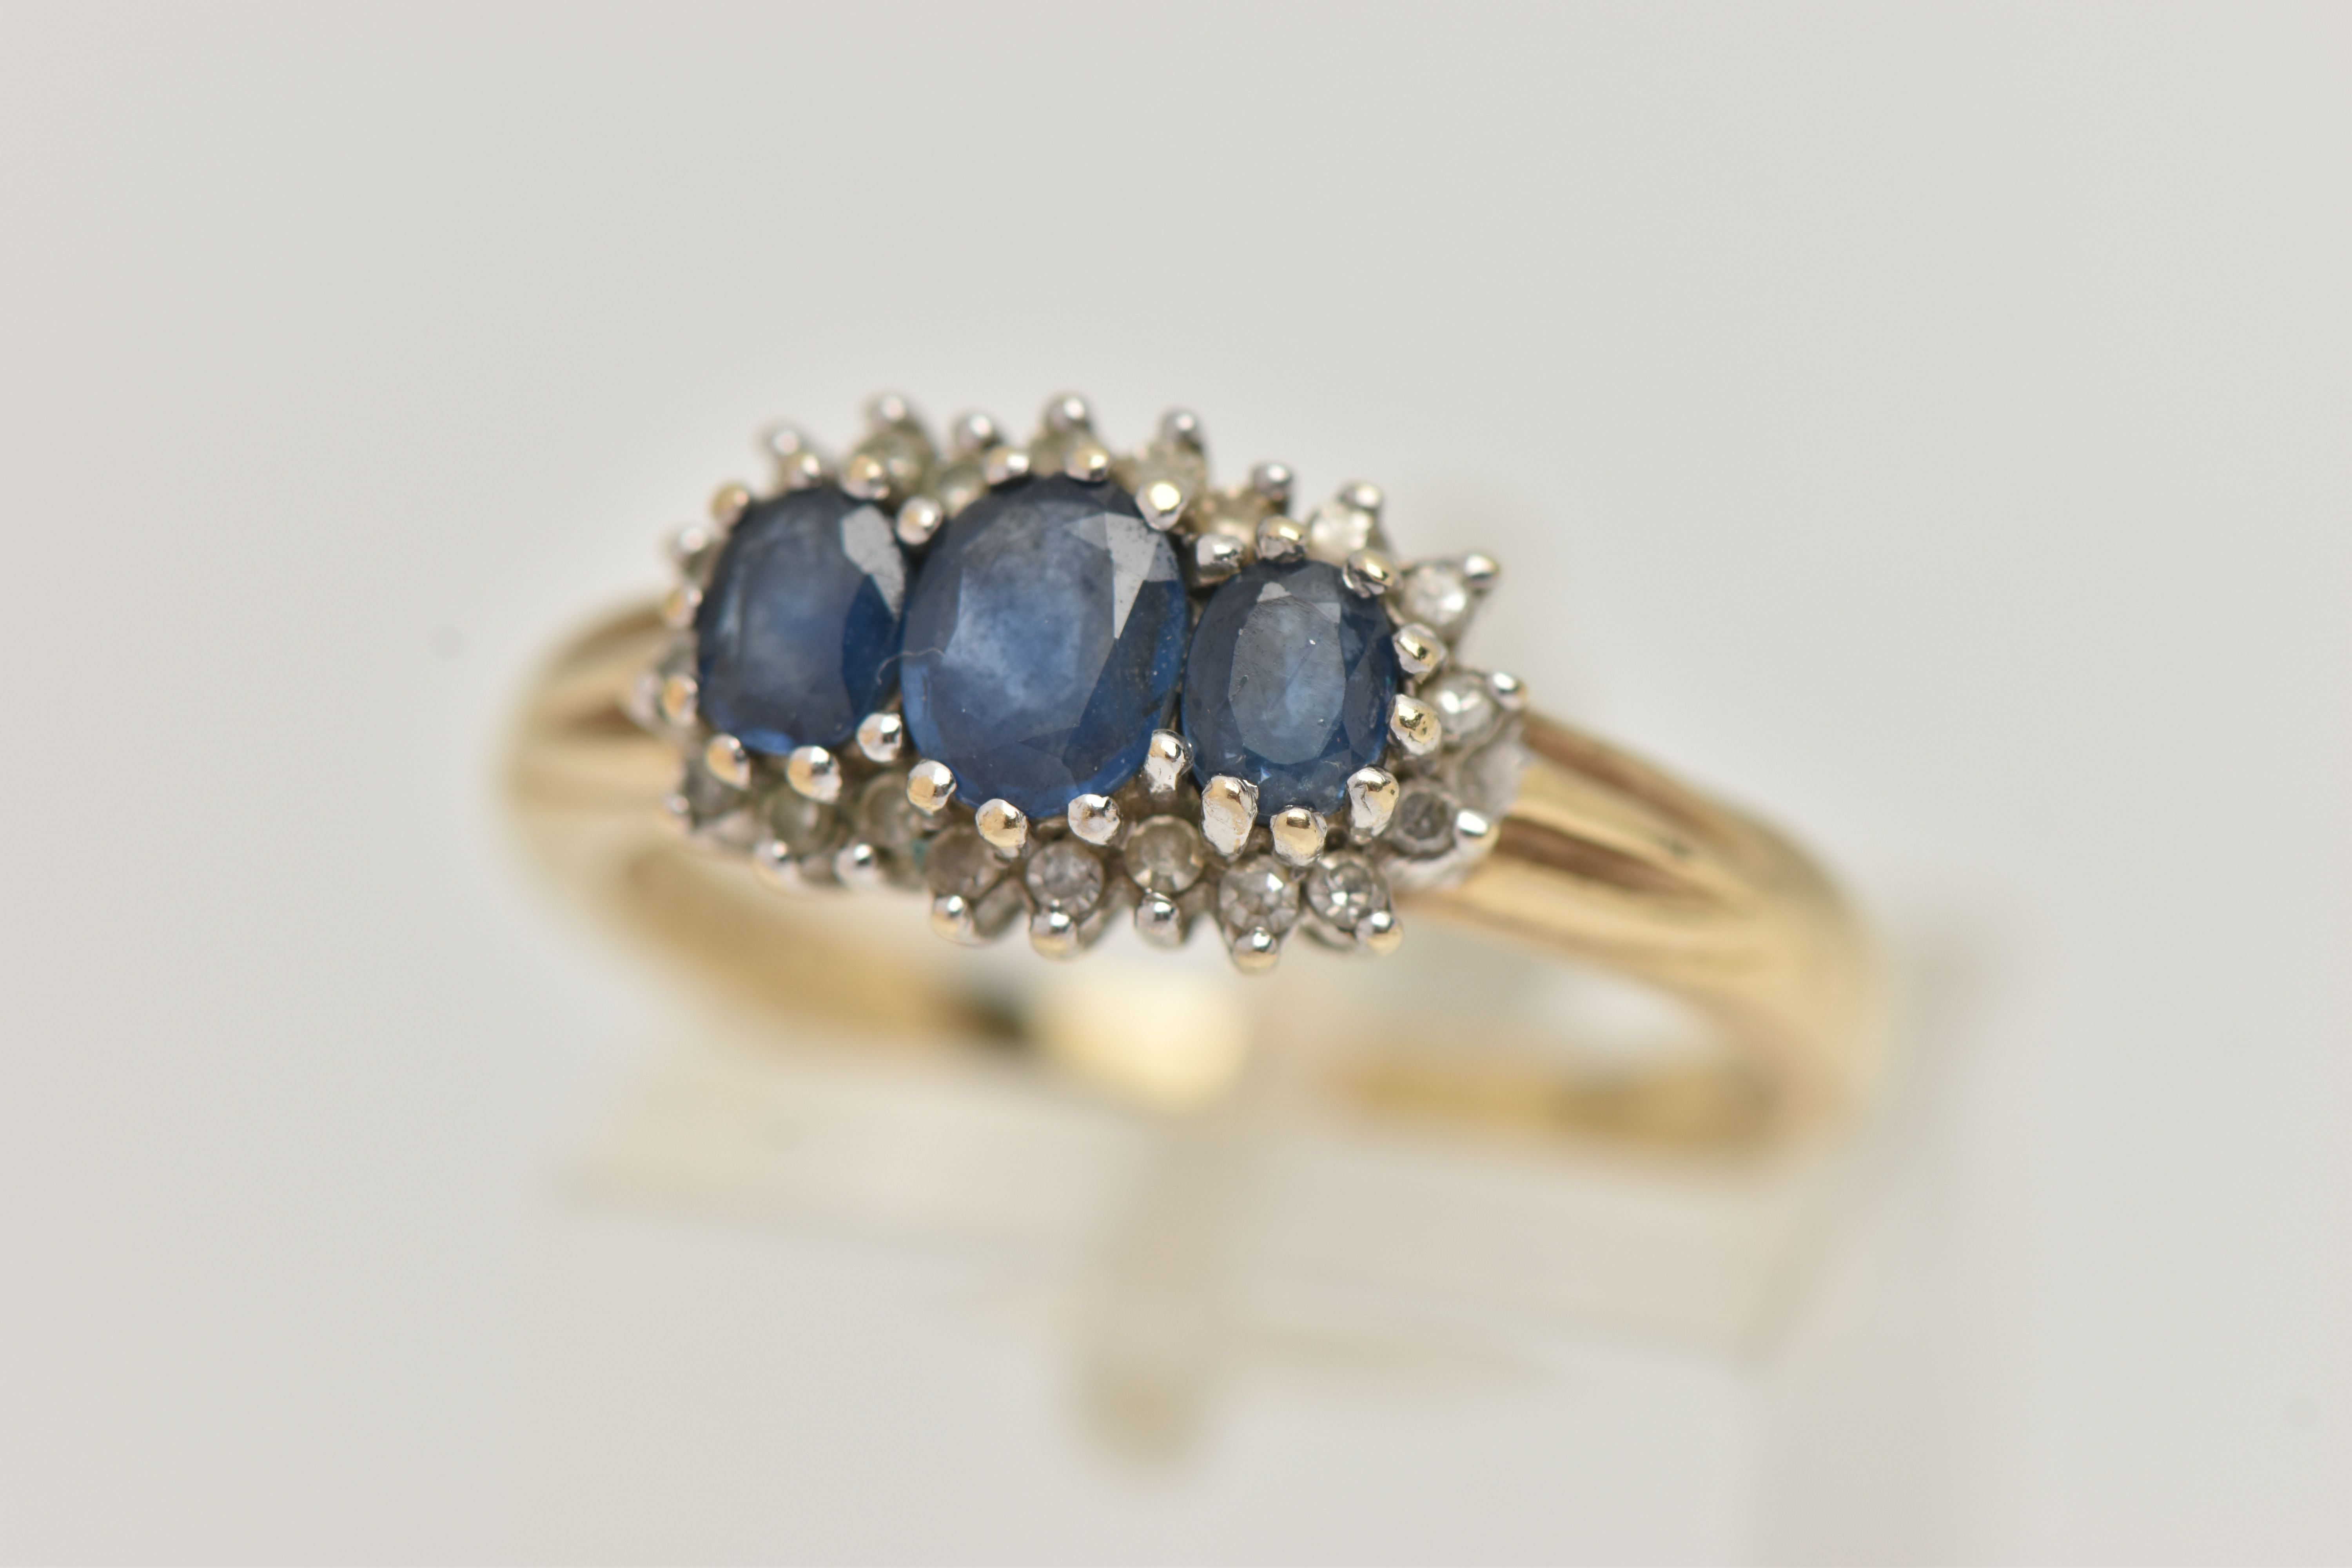 A 9CT GOLD SAPPHIRE AND DIAMOND RING, designed as three graduated oval sapphires within a single cut